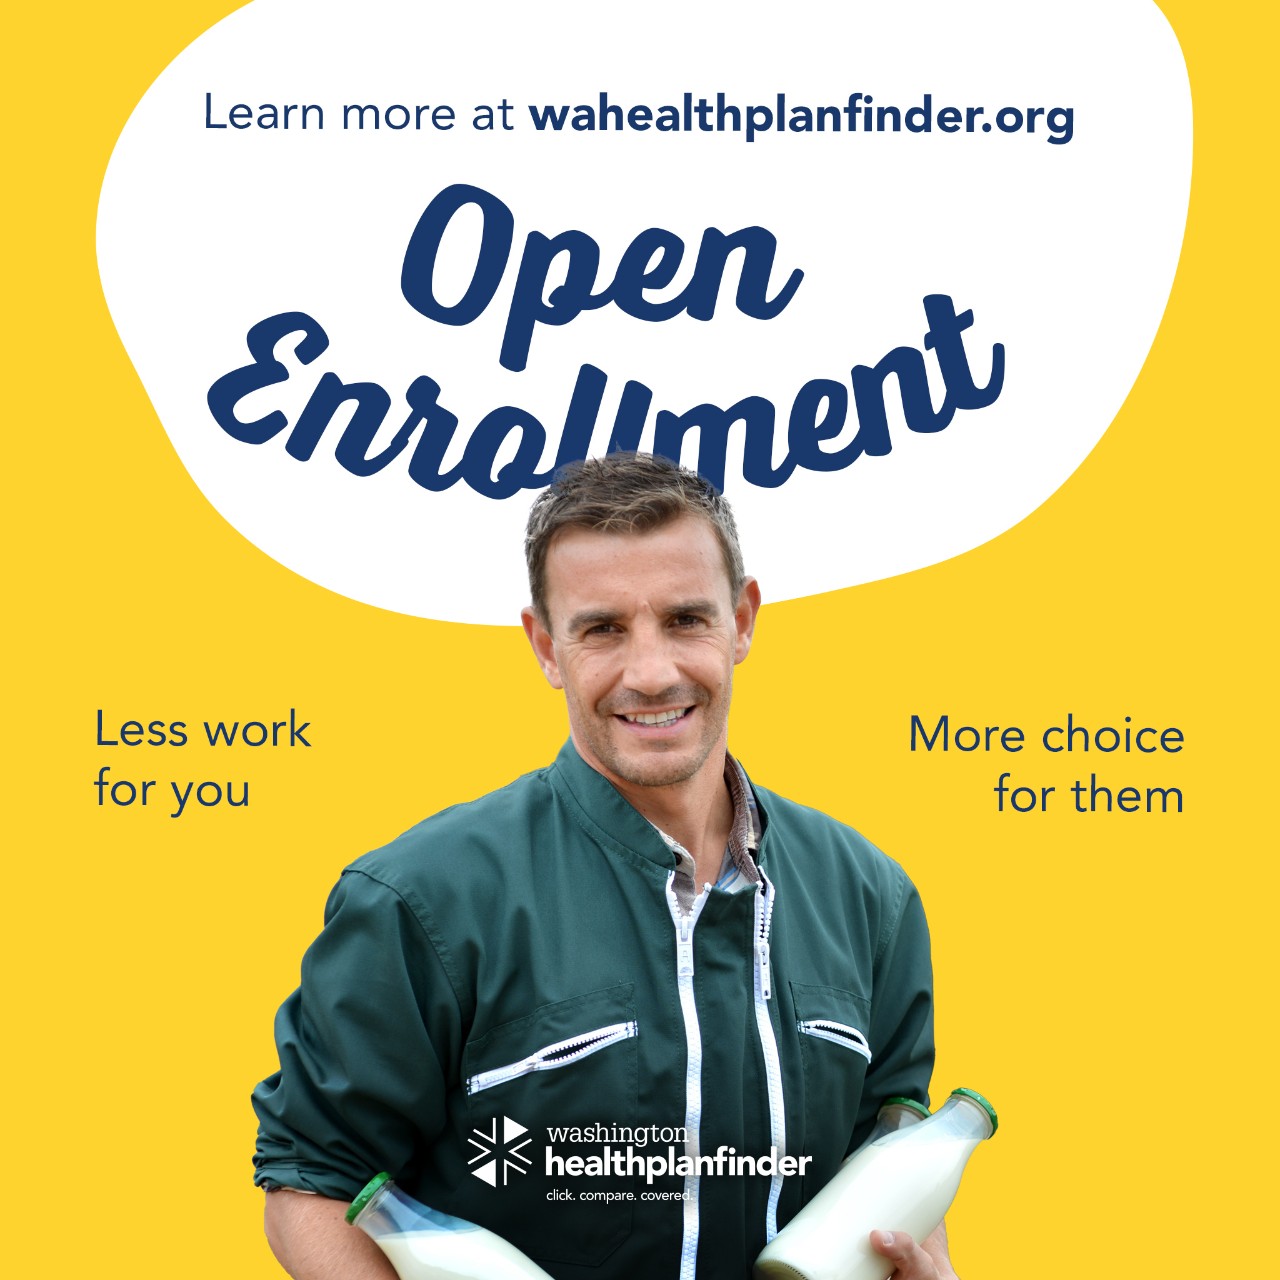 Learn more at wahealthplanfinder.org. Open Enrollment. Less work for you. More choice for them.